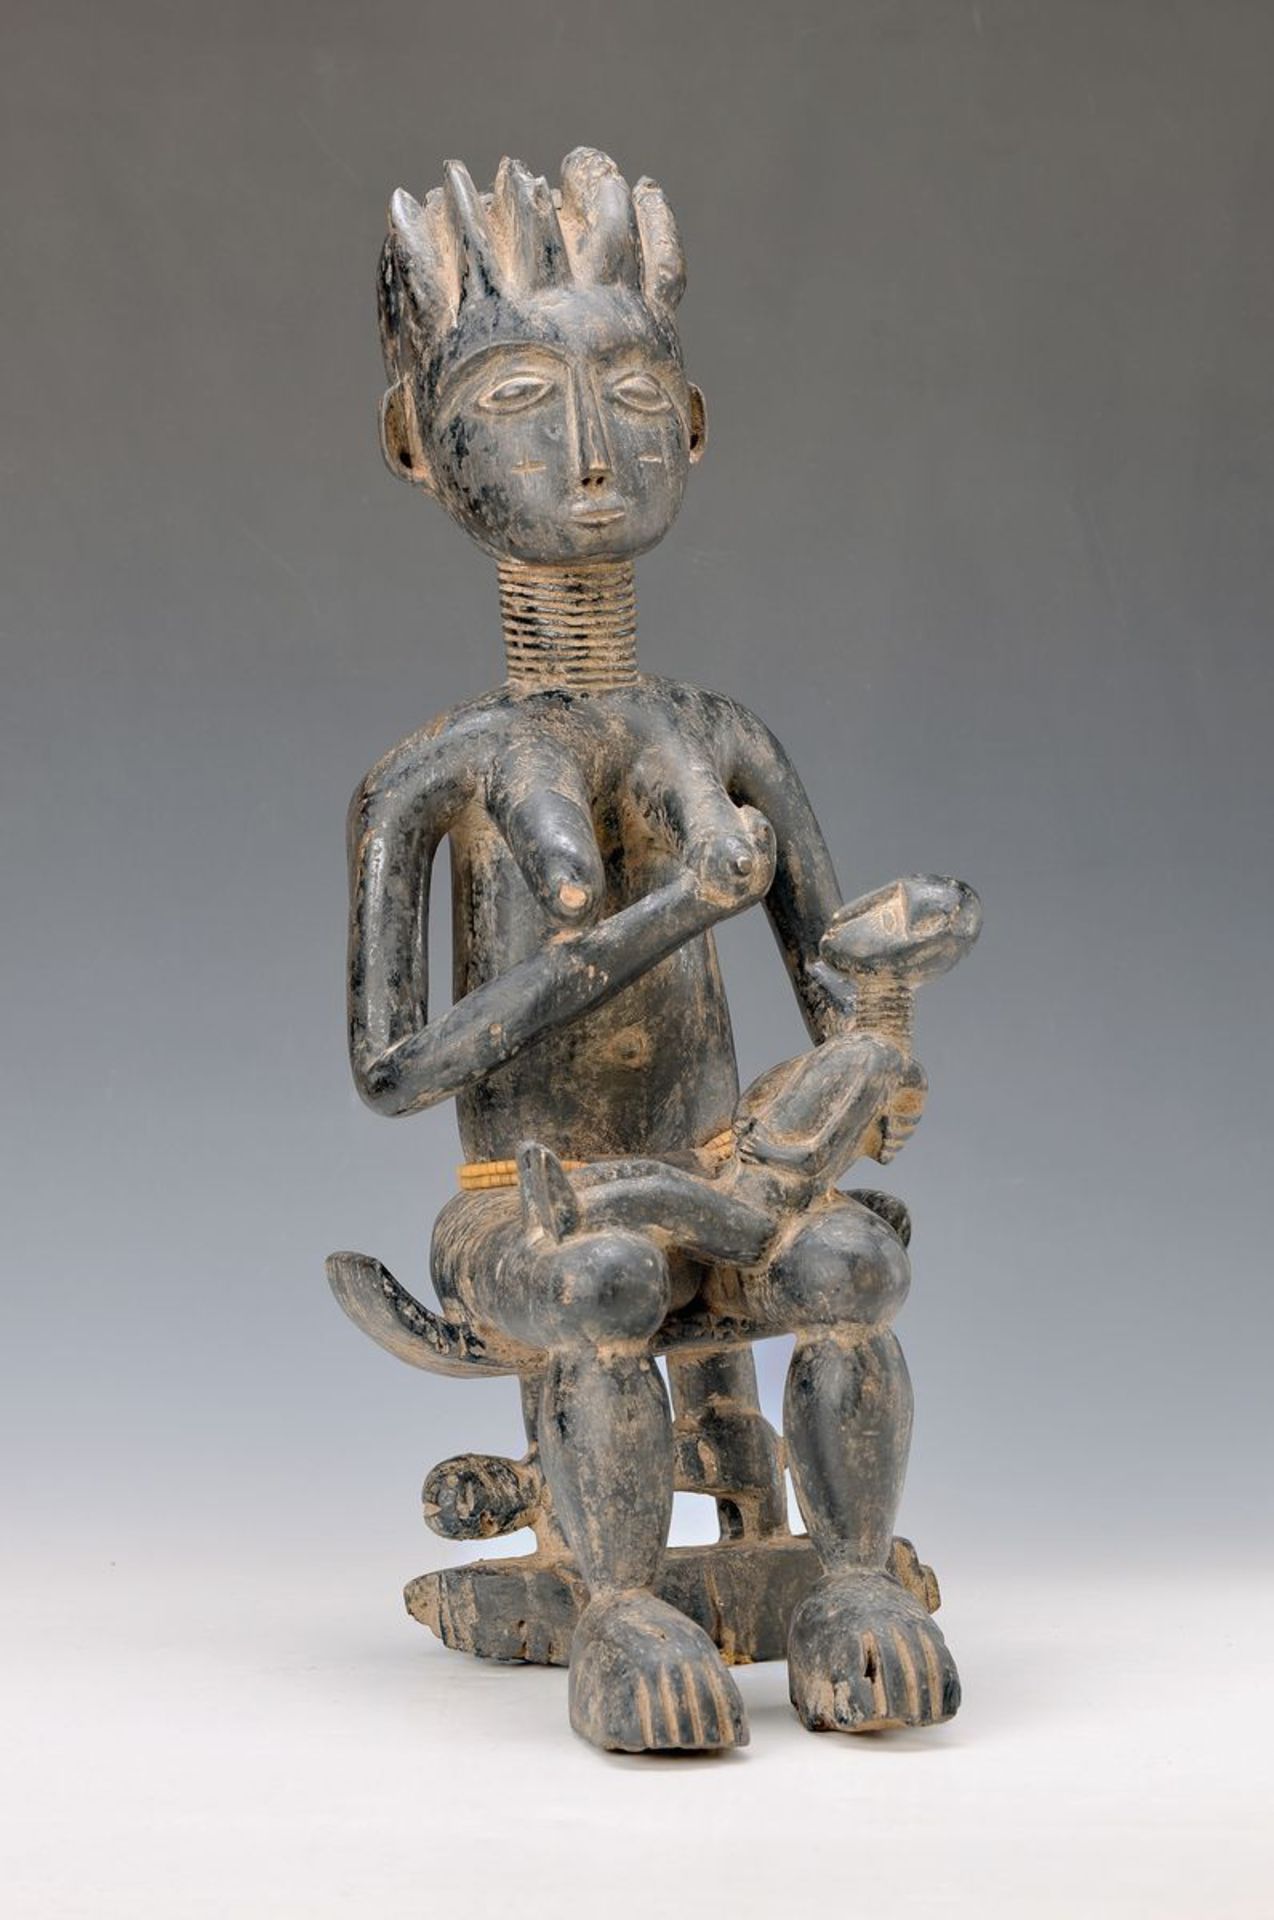 Ancestral sculpture, Ashanti/Ghana, approx. 40-50 years old, mother with child, wood, fine Patina,